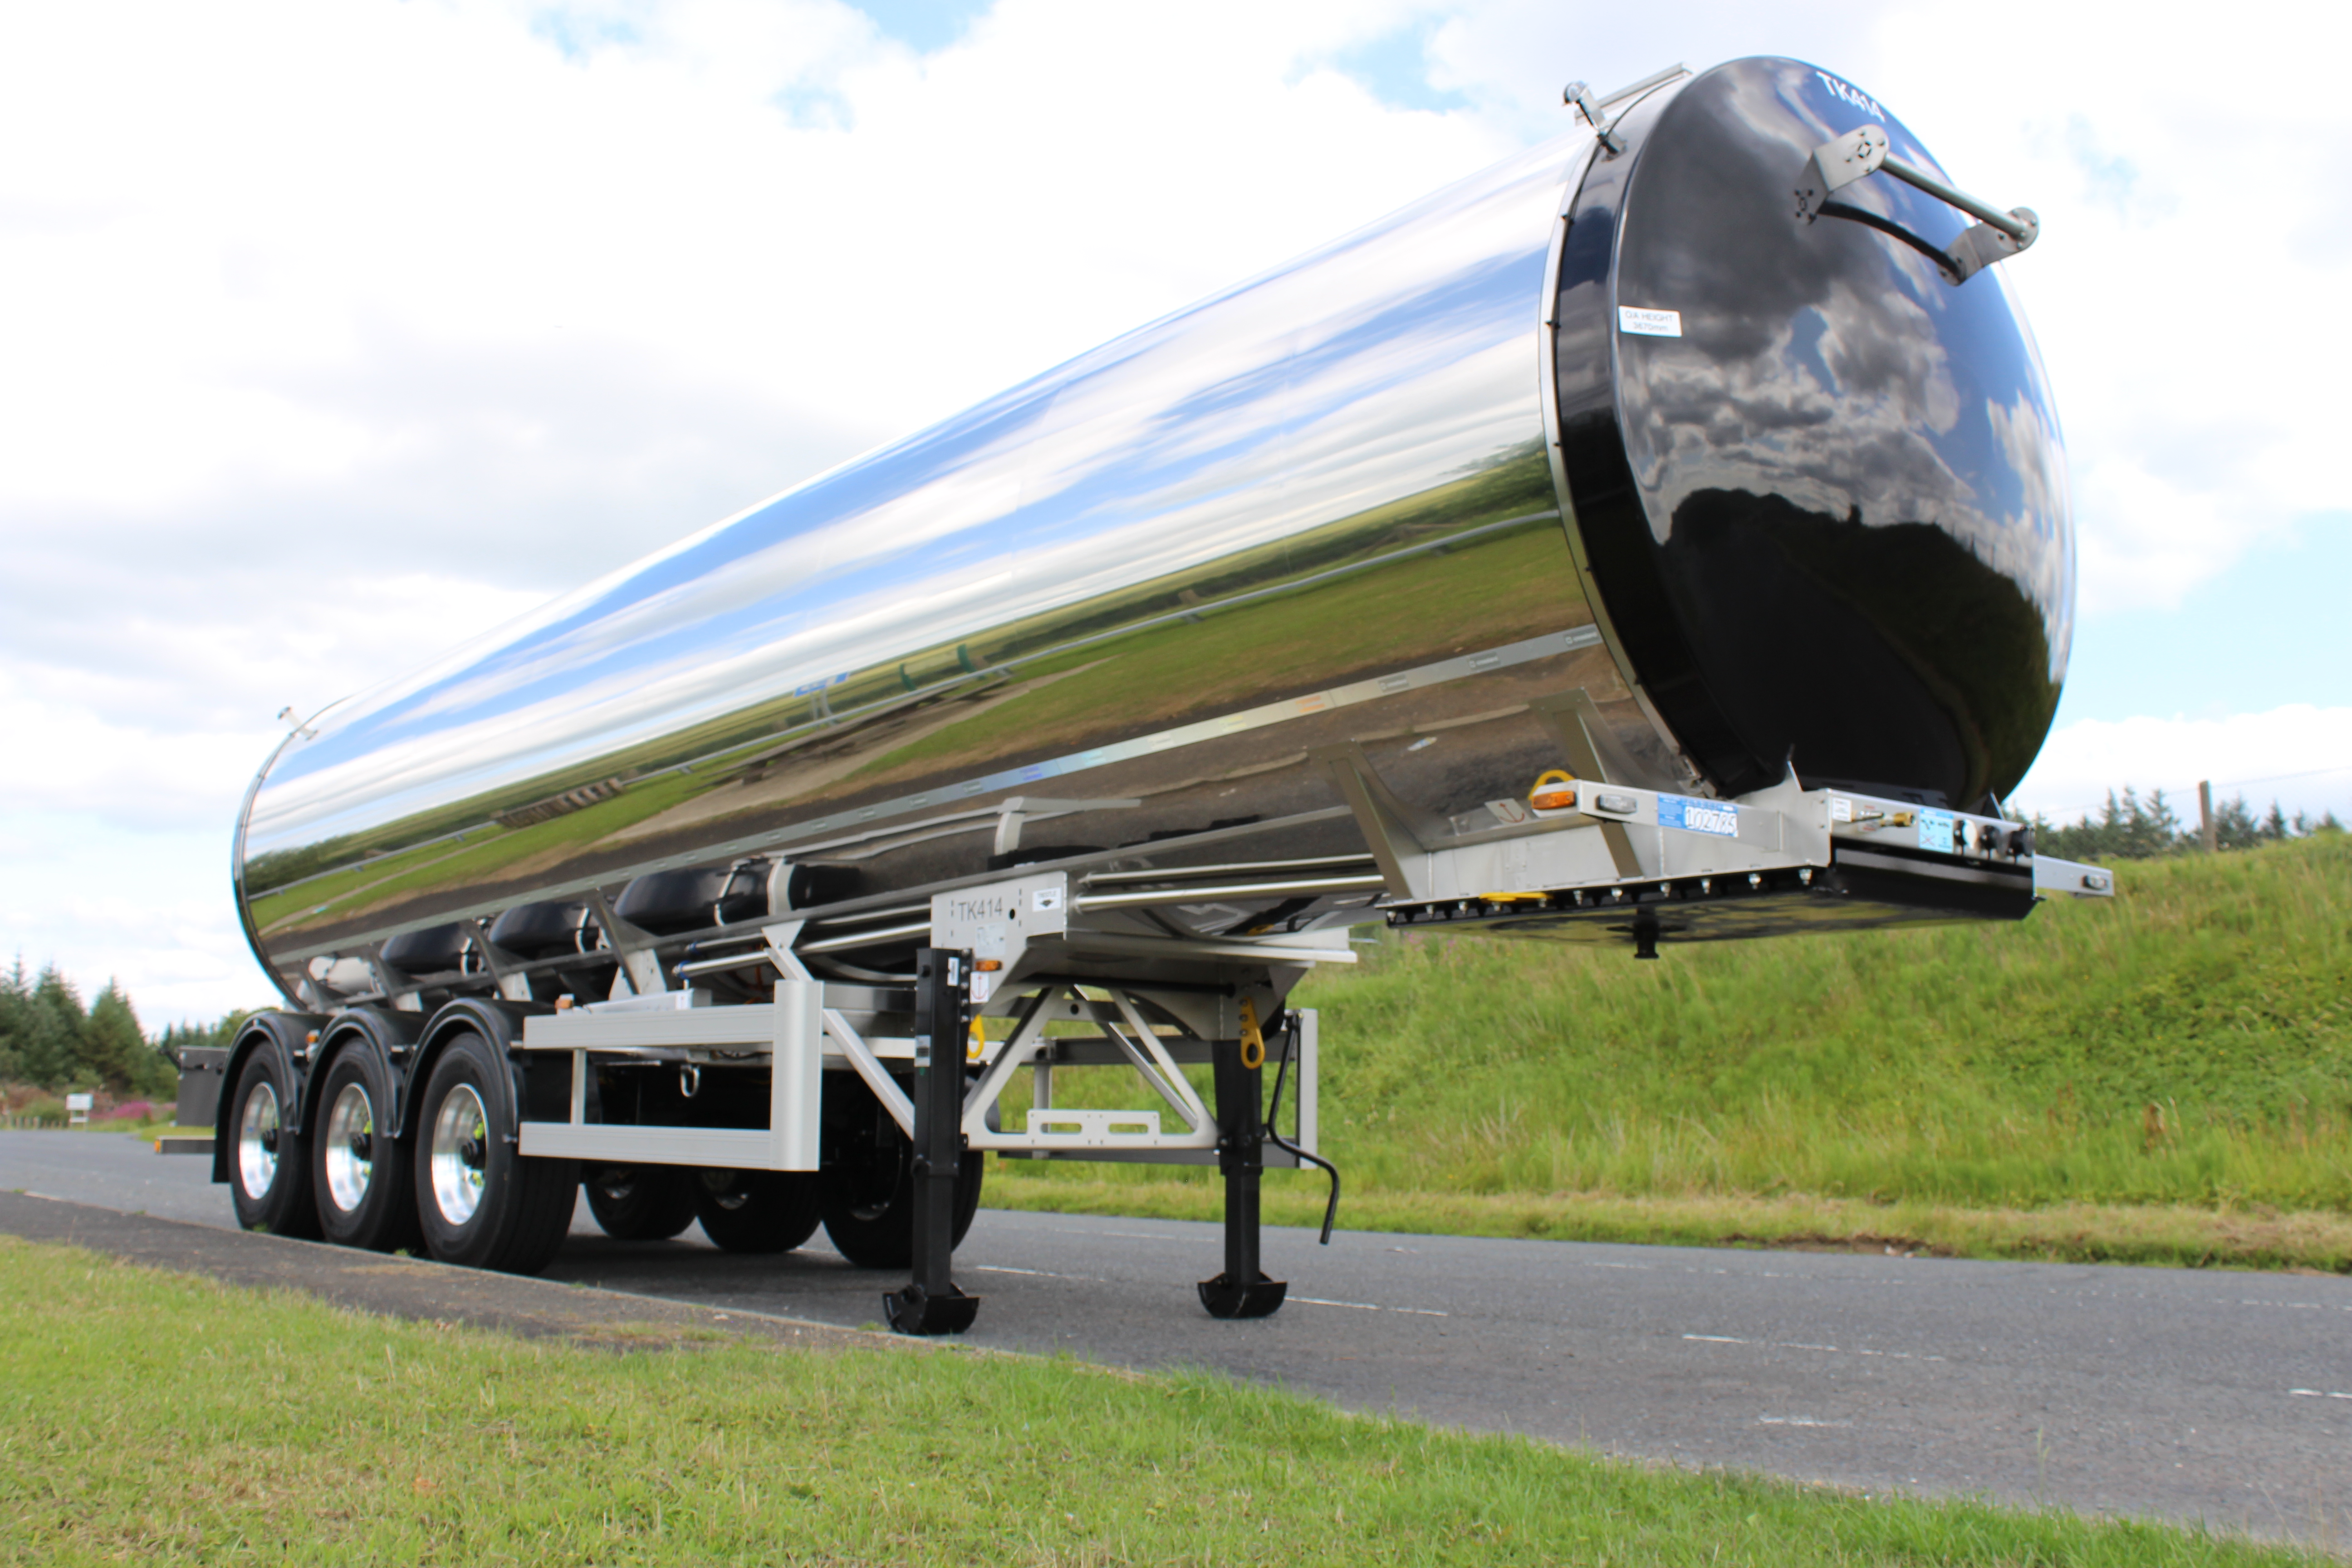 Crossland manufacture hygienic and reliable beer tankers for the food and beverage market throughout the EU